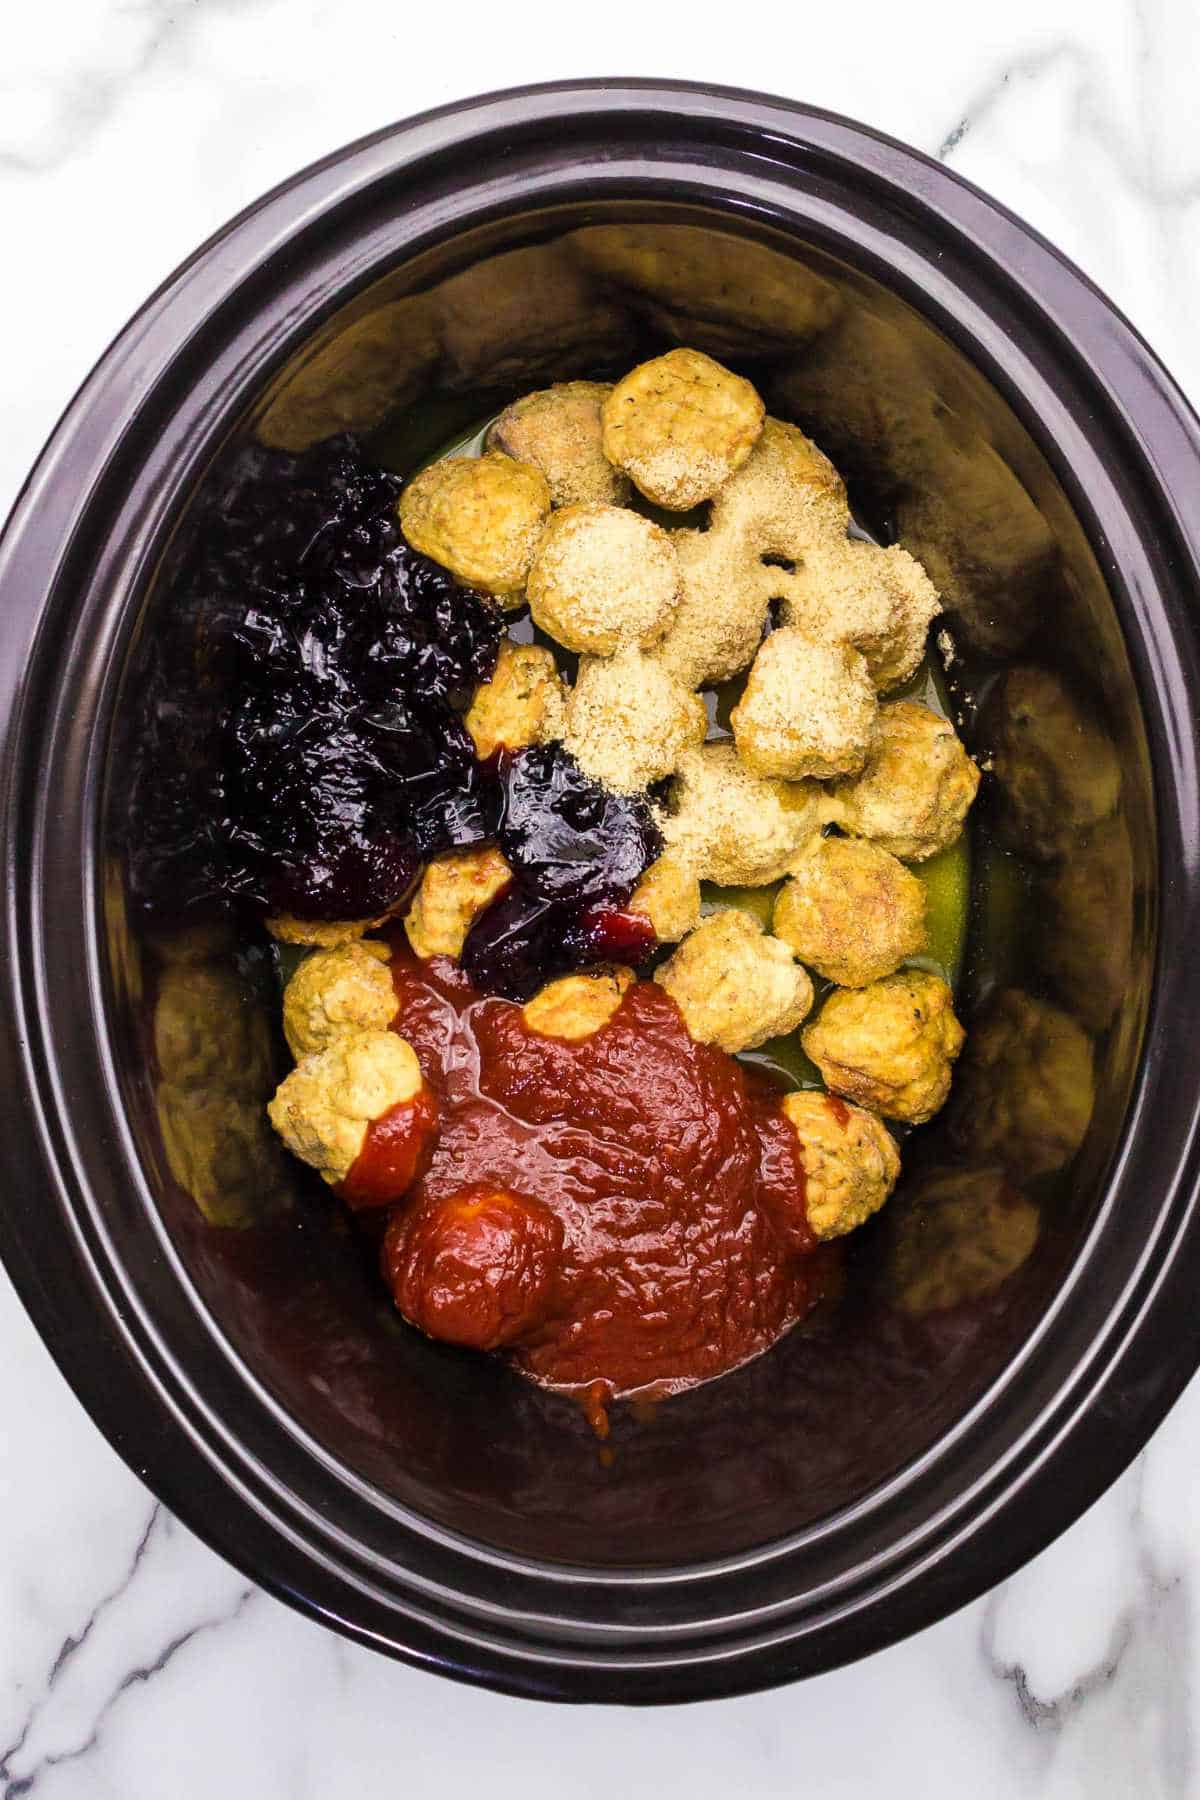 seasonings and grape jelly and chili sauce in a  slow cooker.